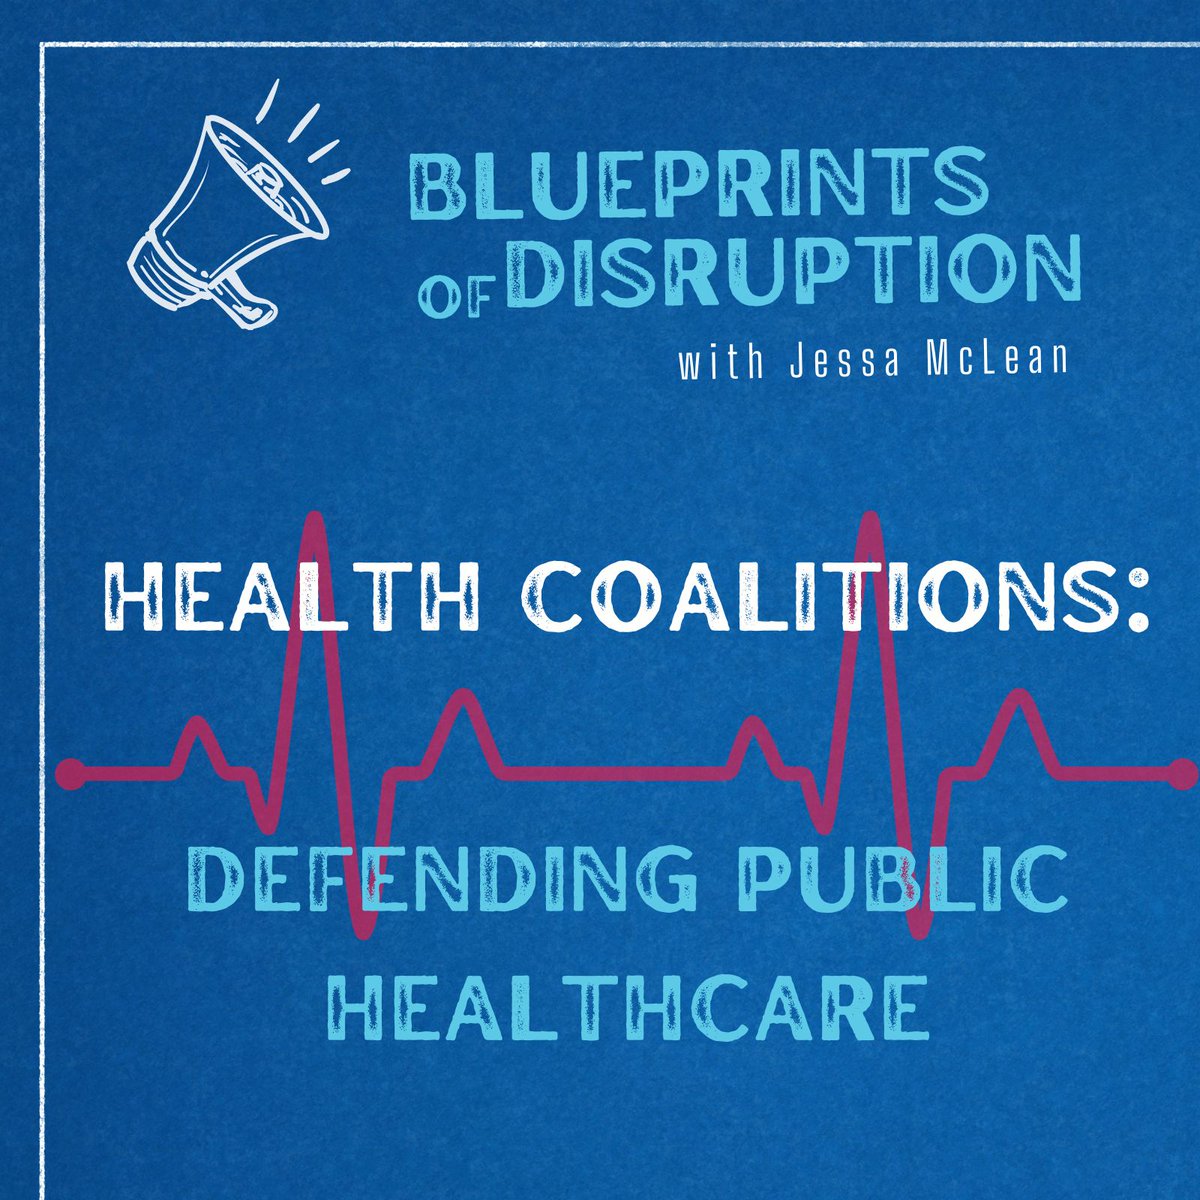 Defending Our Public Healthcare

Health Coaltions like @HealthCoalition @_NSHC @BCHC @OntarioHealthC @HealthCoNL @cssante have been tasked with a big job.

How are they pushing back? Listen to @peterbergmanis and @Jessa_McLean explore that here: player.captivate.fm/episode/1c8732… #cdnpoli